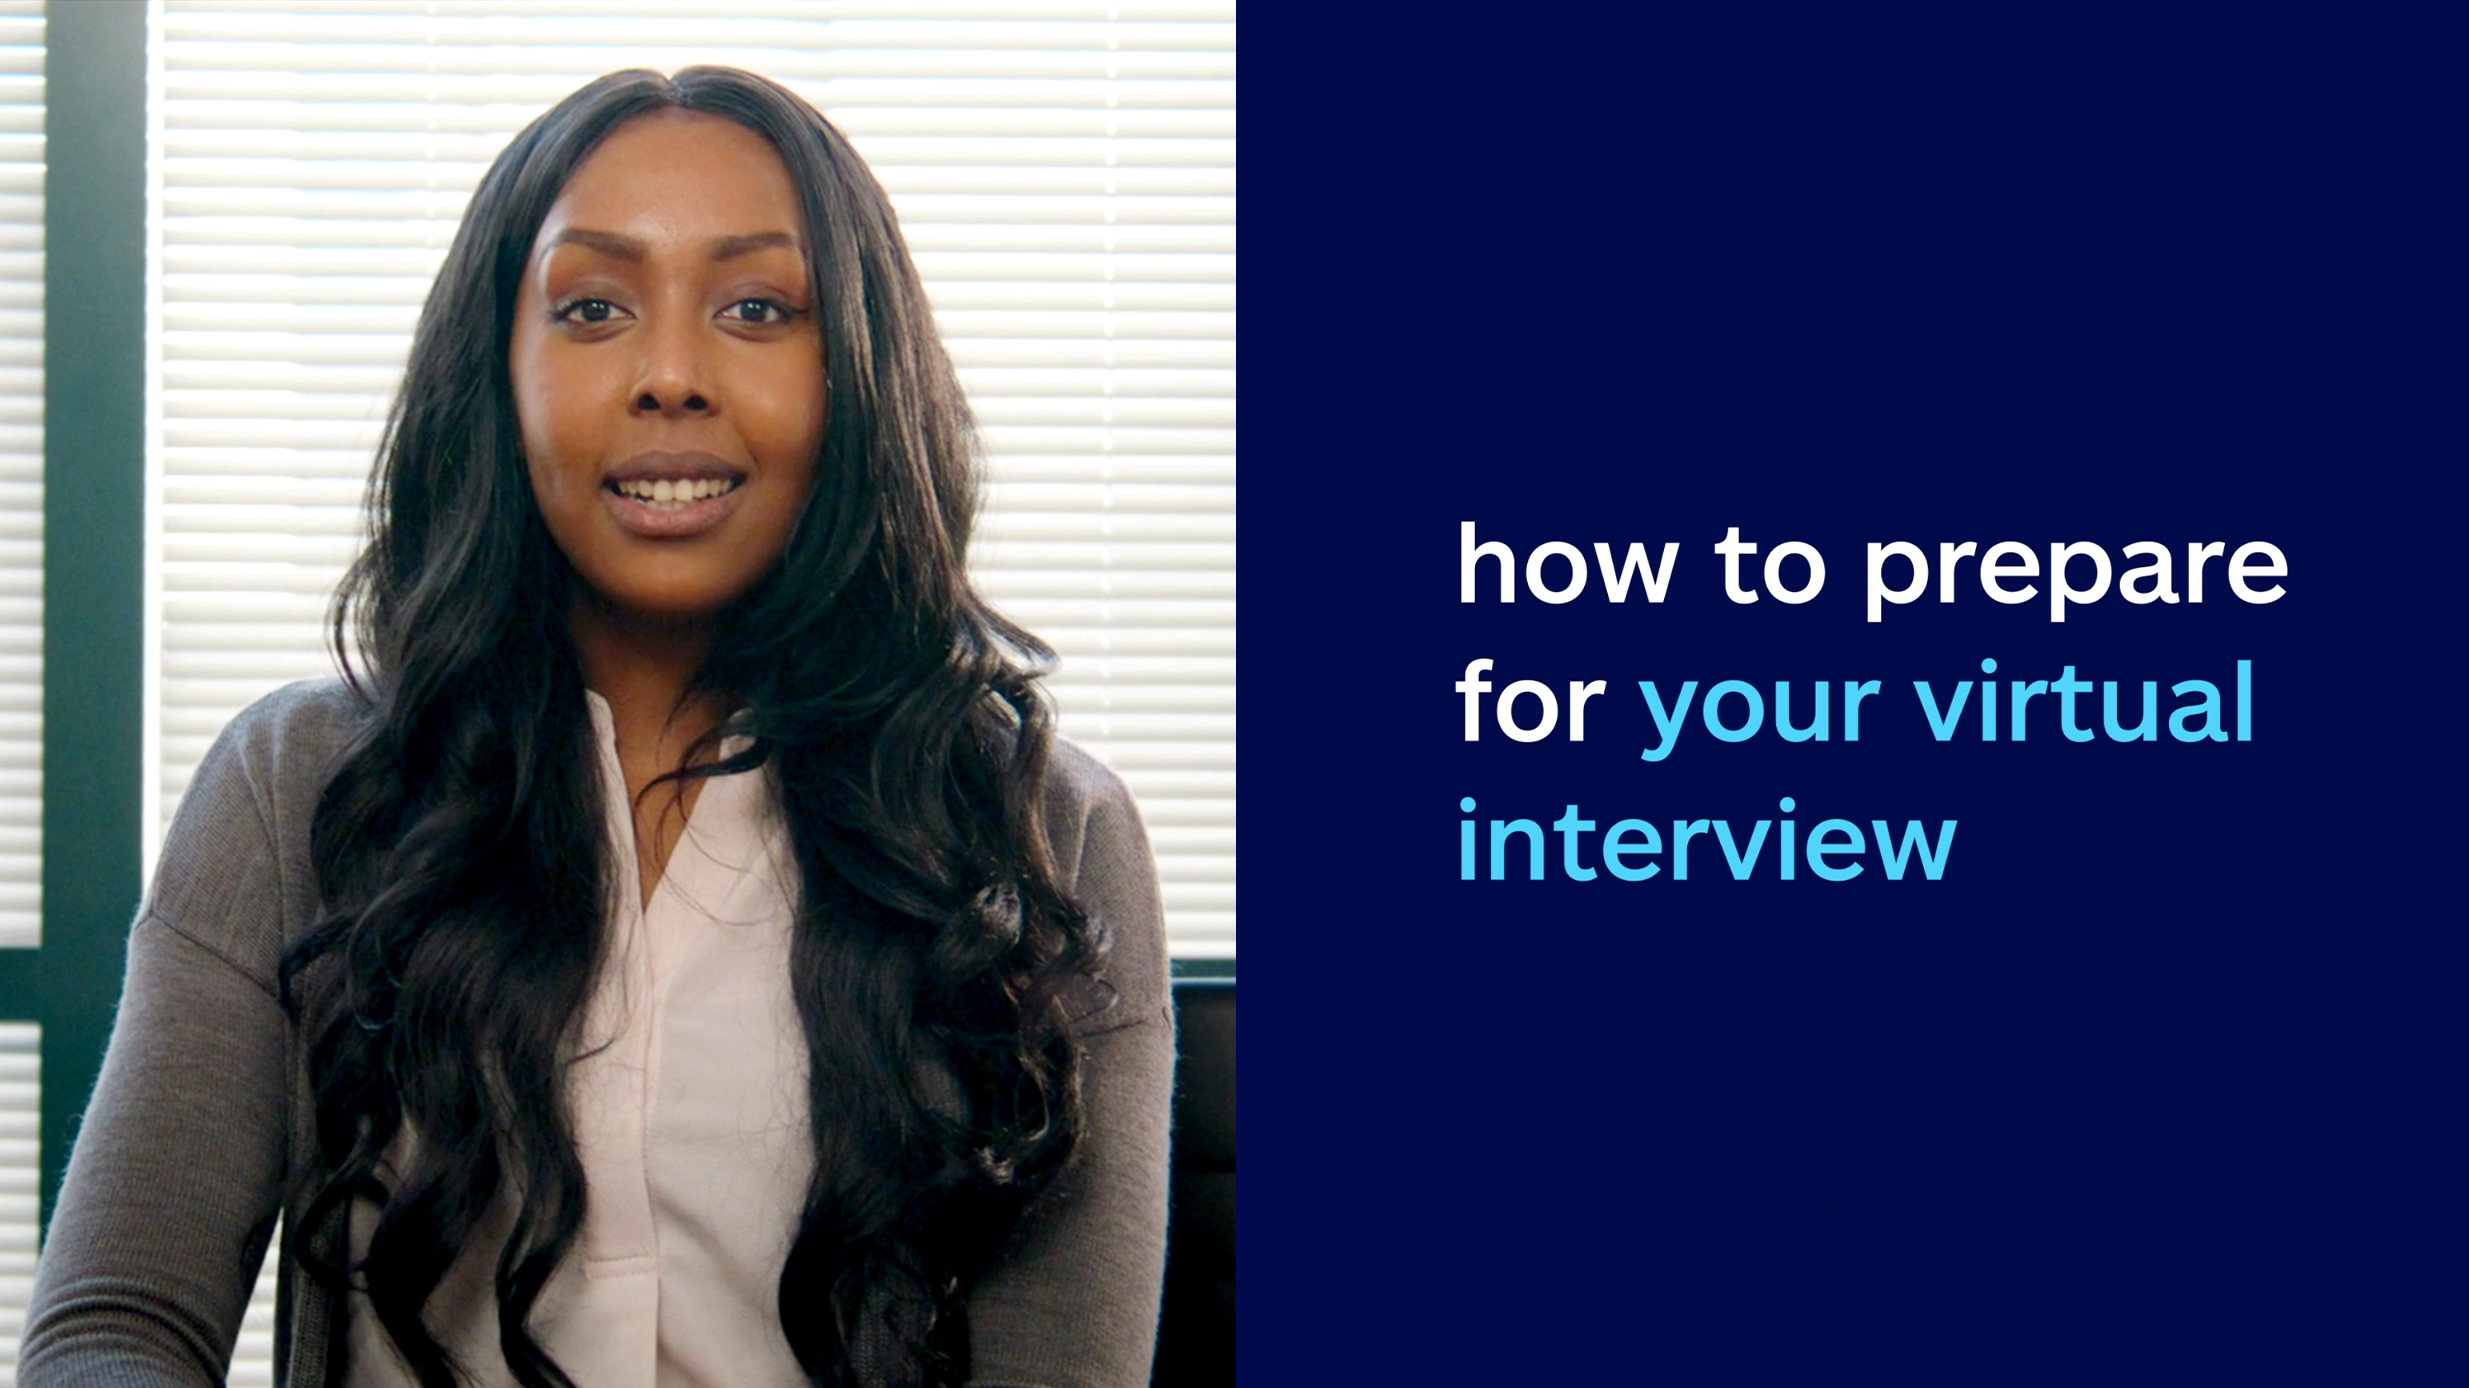 How to prepare for your virtual interview